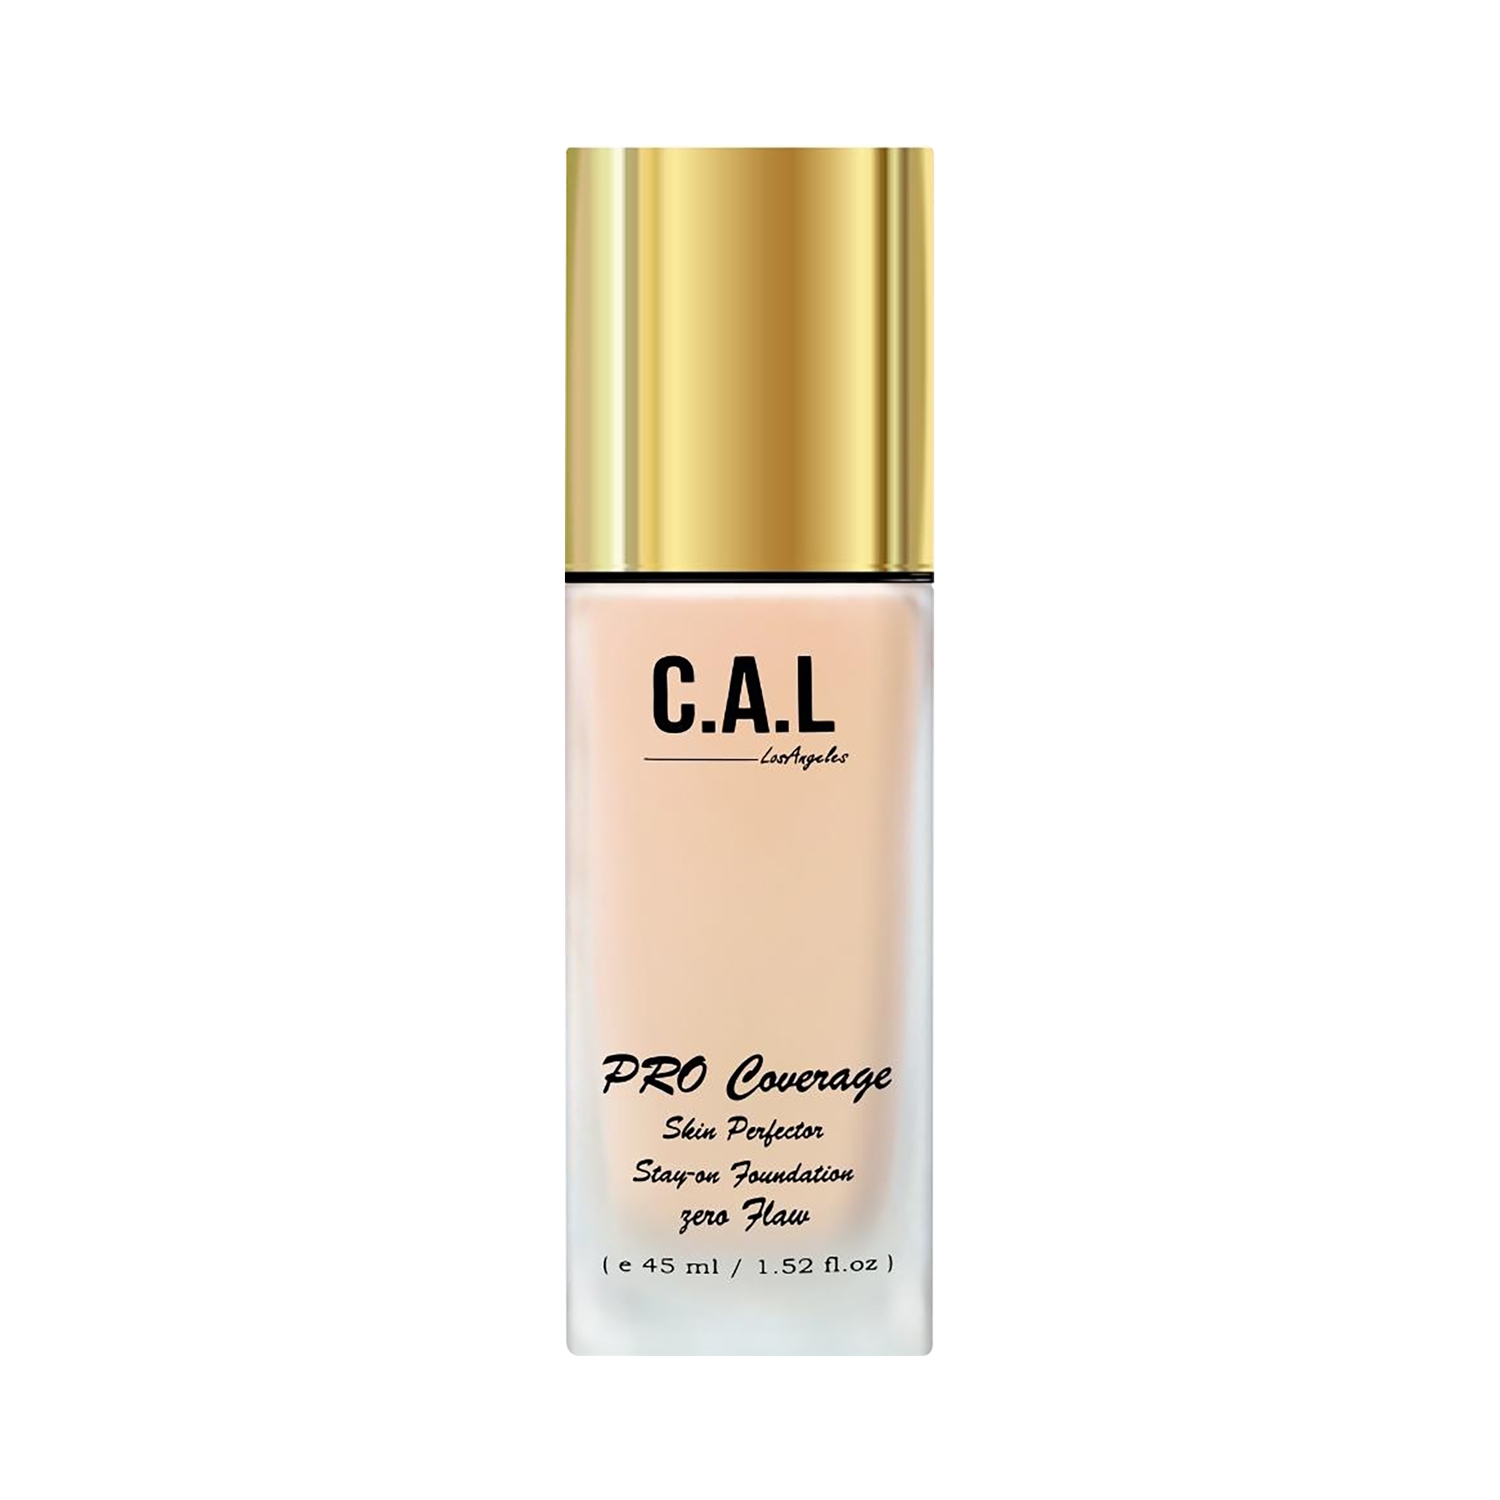 C.A.L Los Angeles | C.A.L Los Angeles Skin Perfector Stay On Foundation - 02 Porcelain Ivory (45ml)